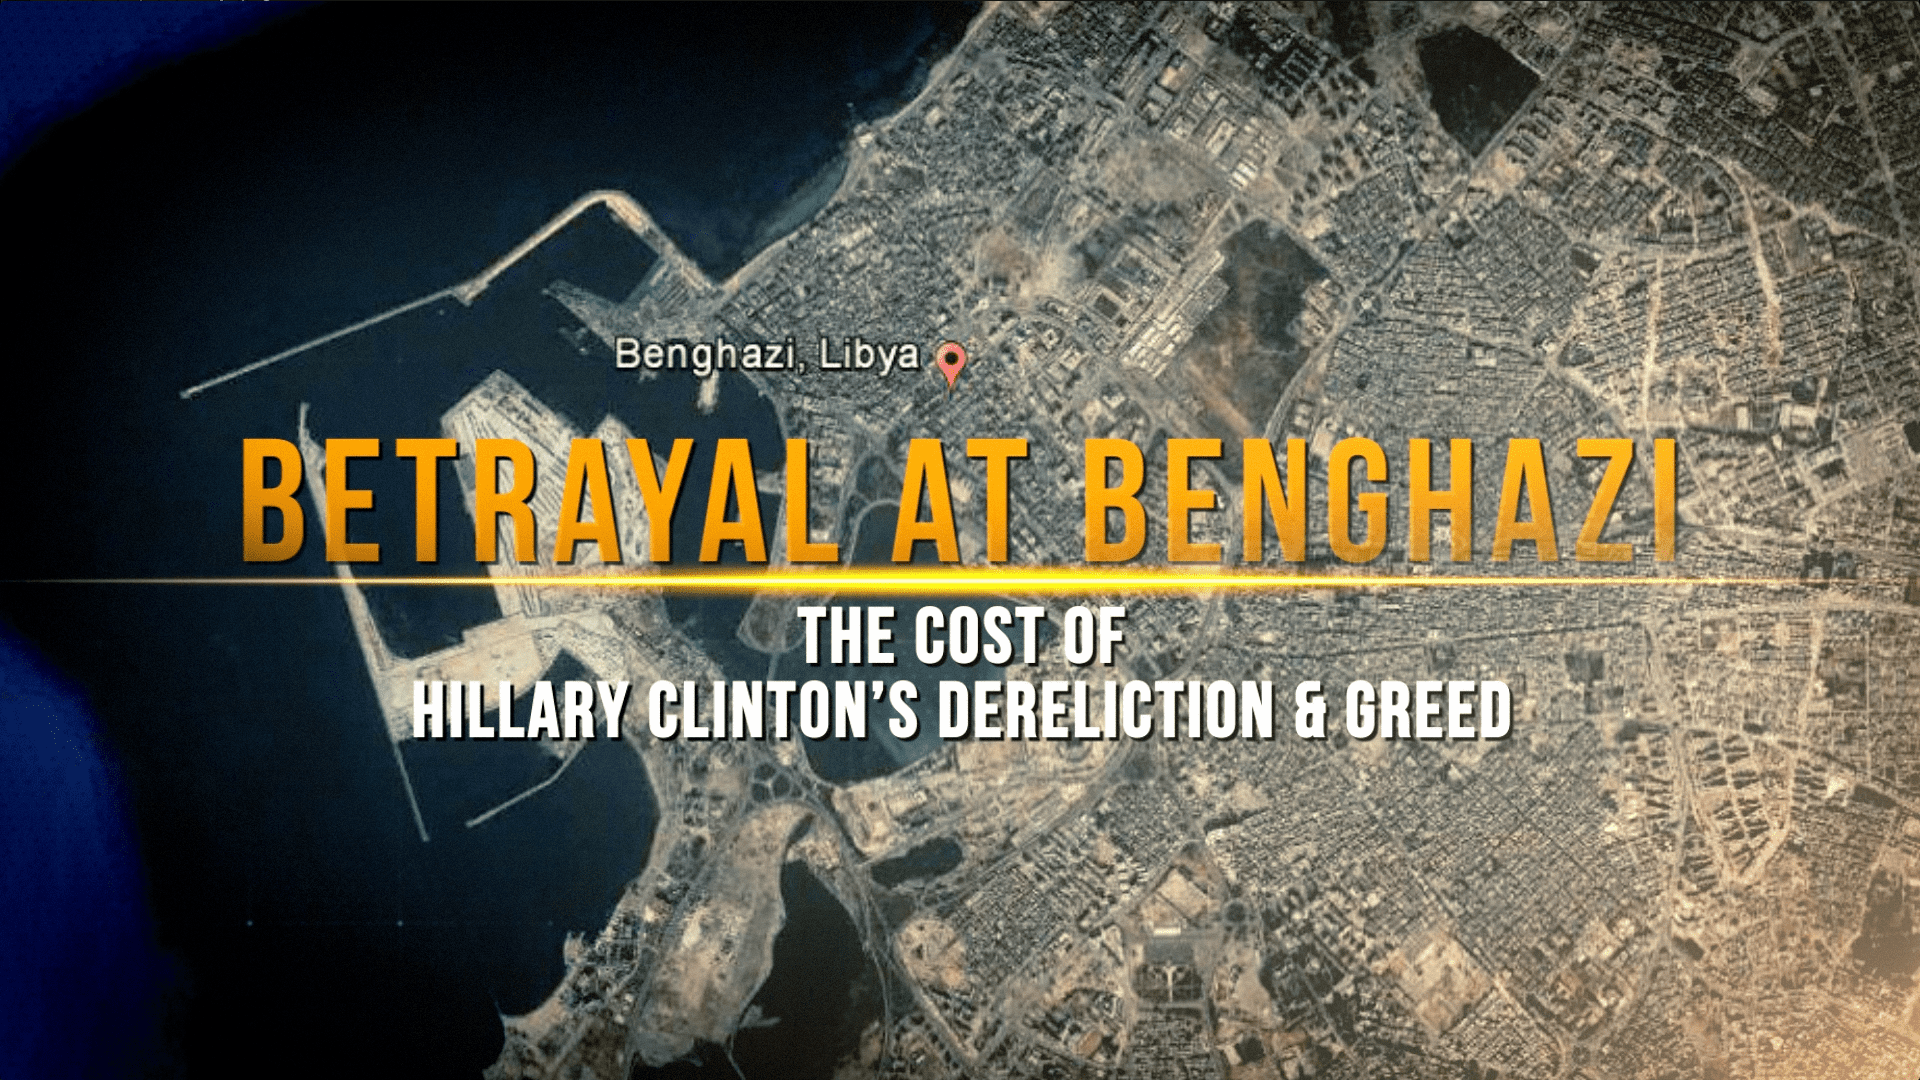 Benghazi-Opening-Title-still.png